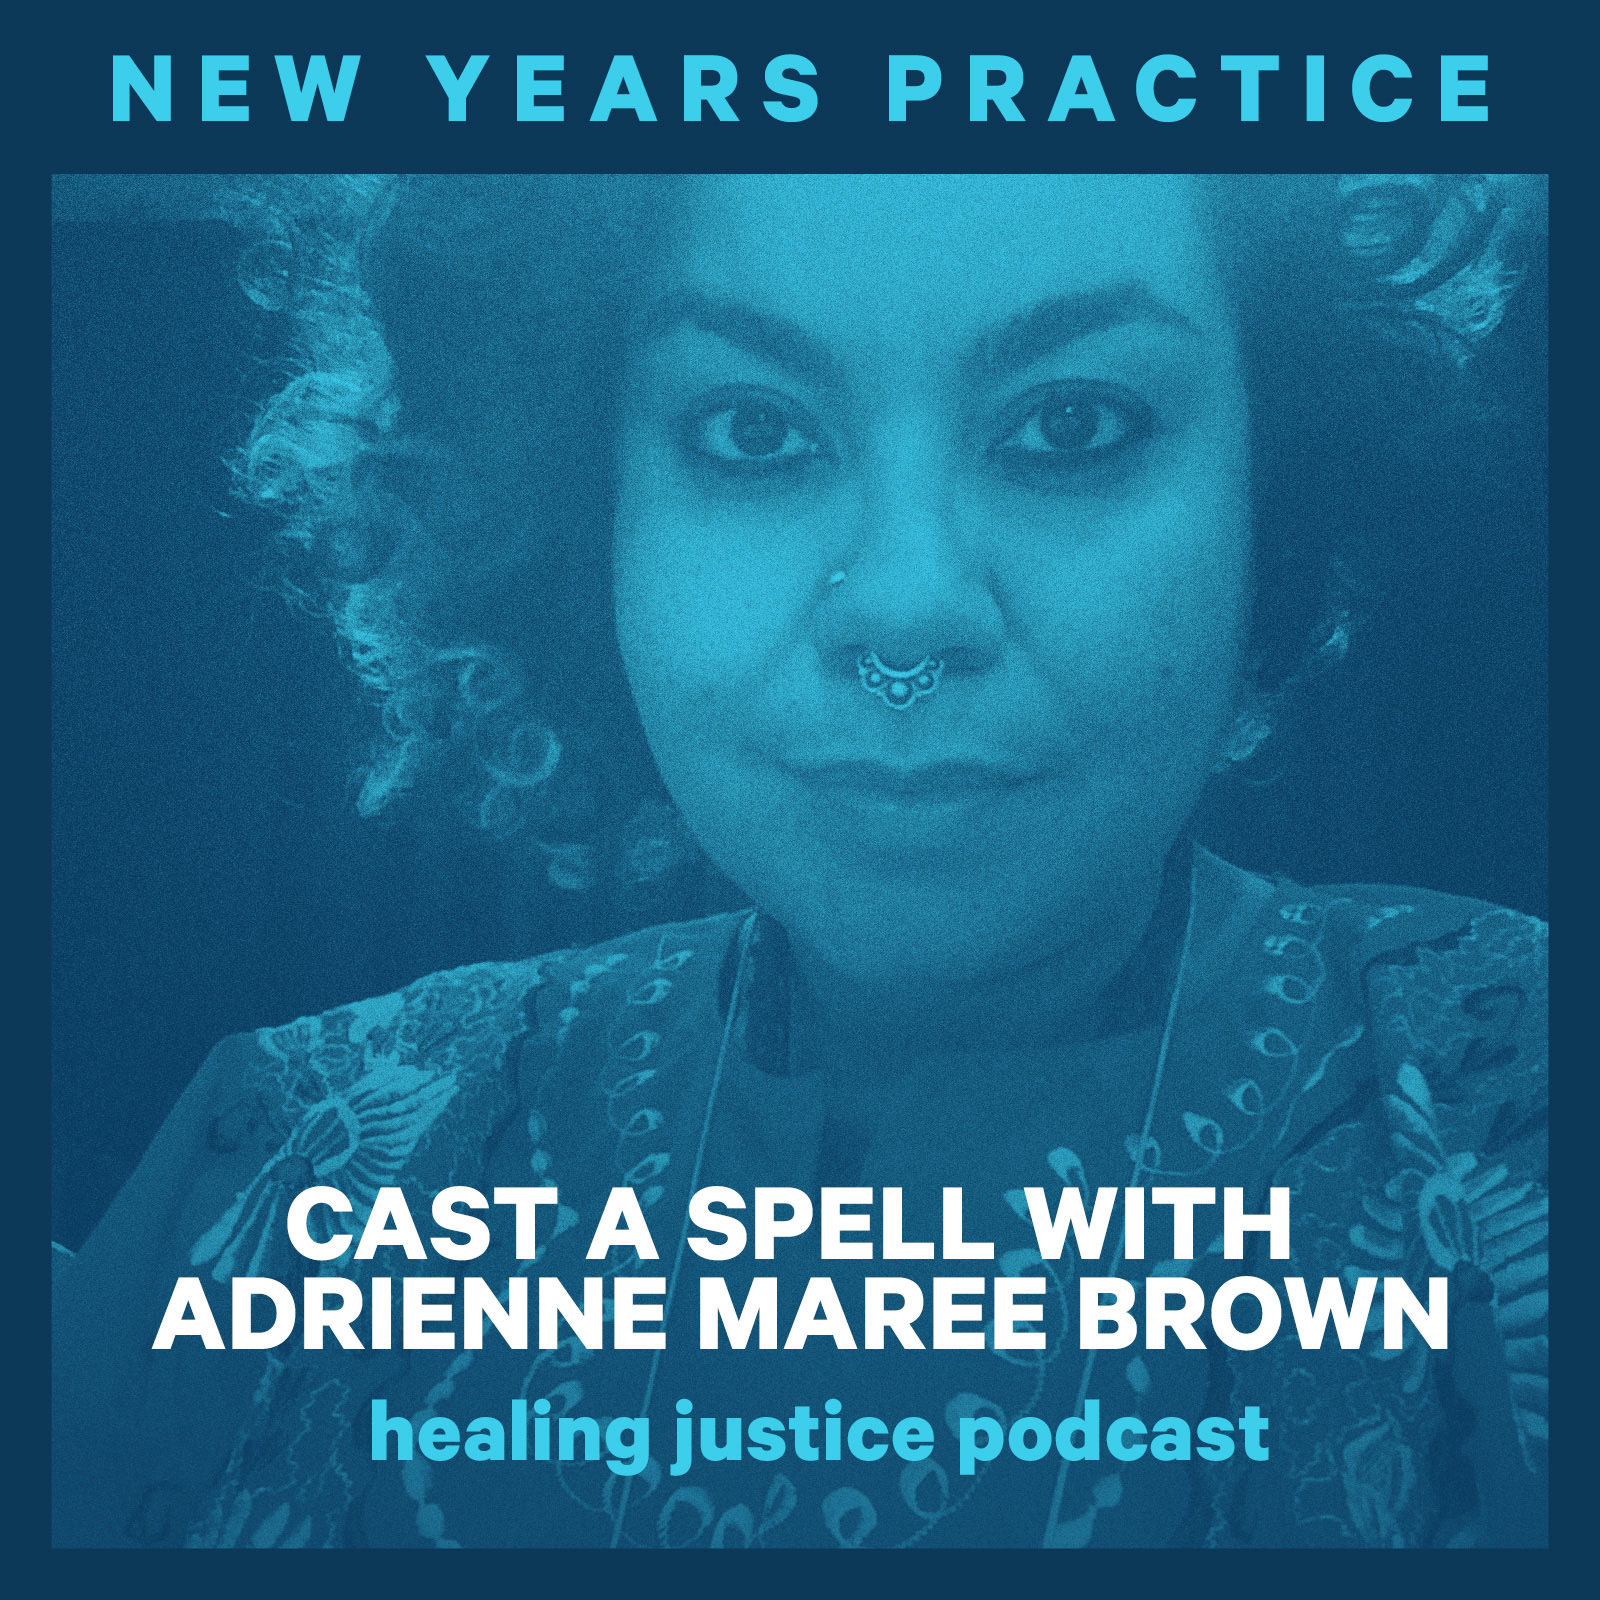 10 New Years Practice: Cast a Spell with adrienne maree brown